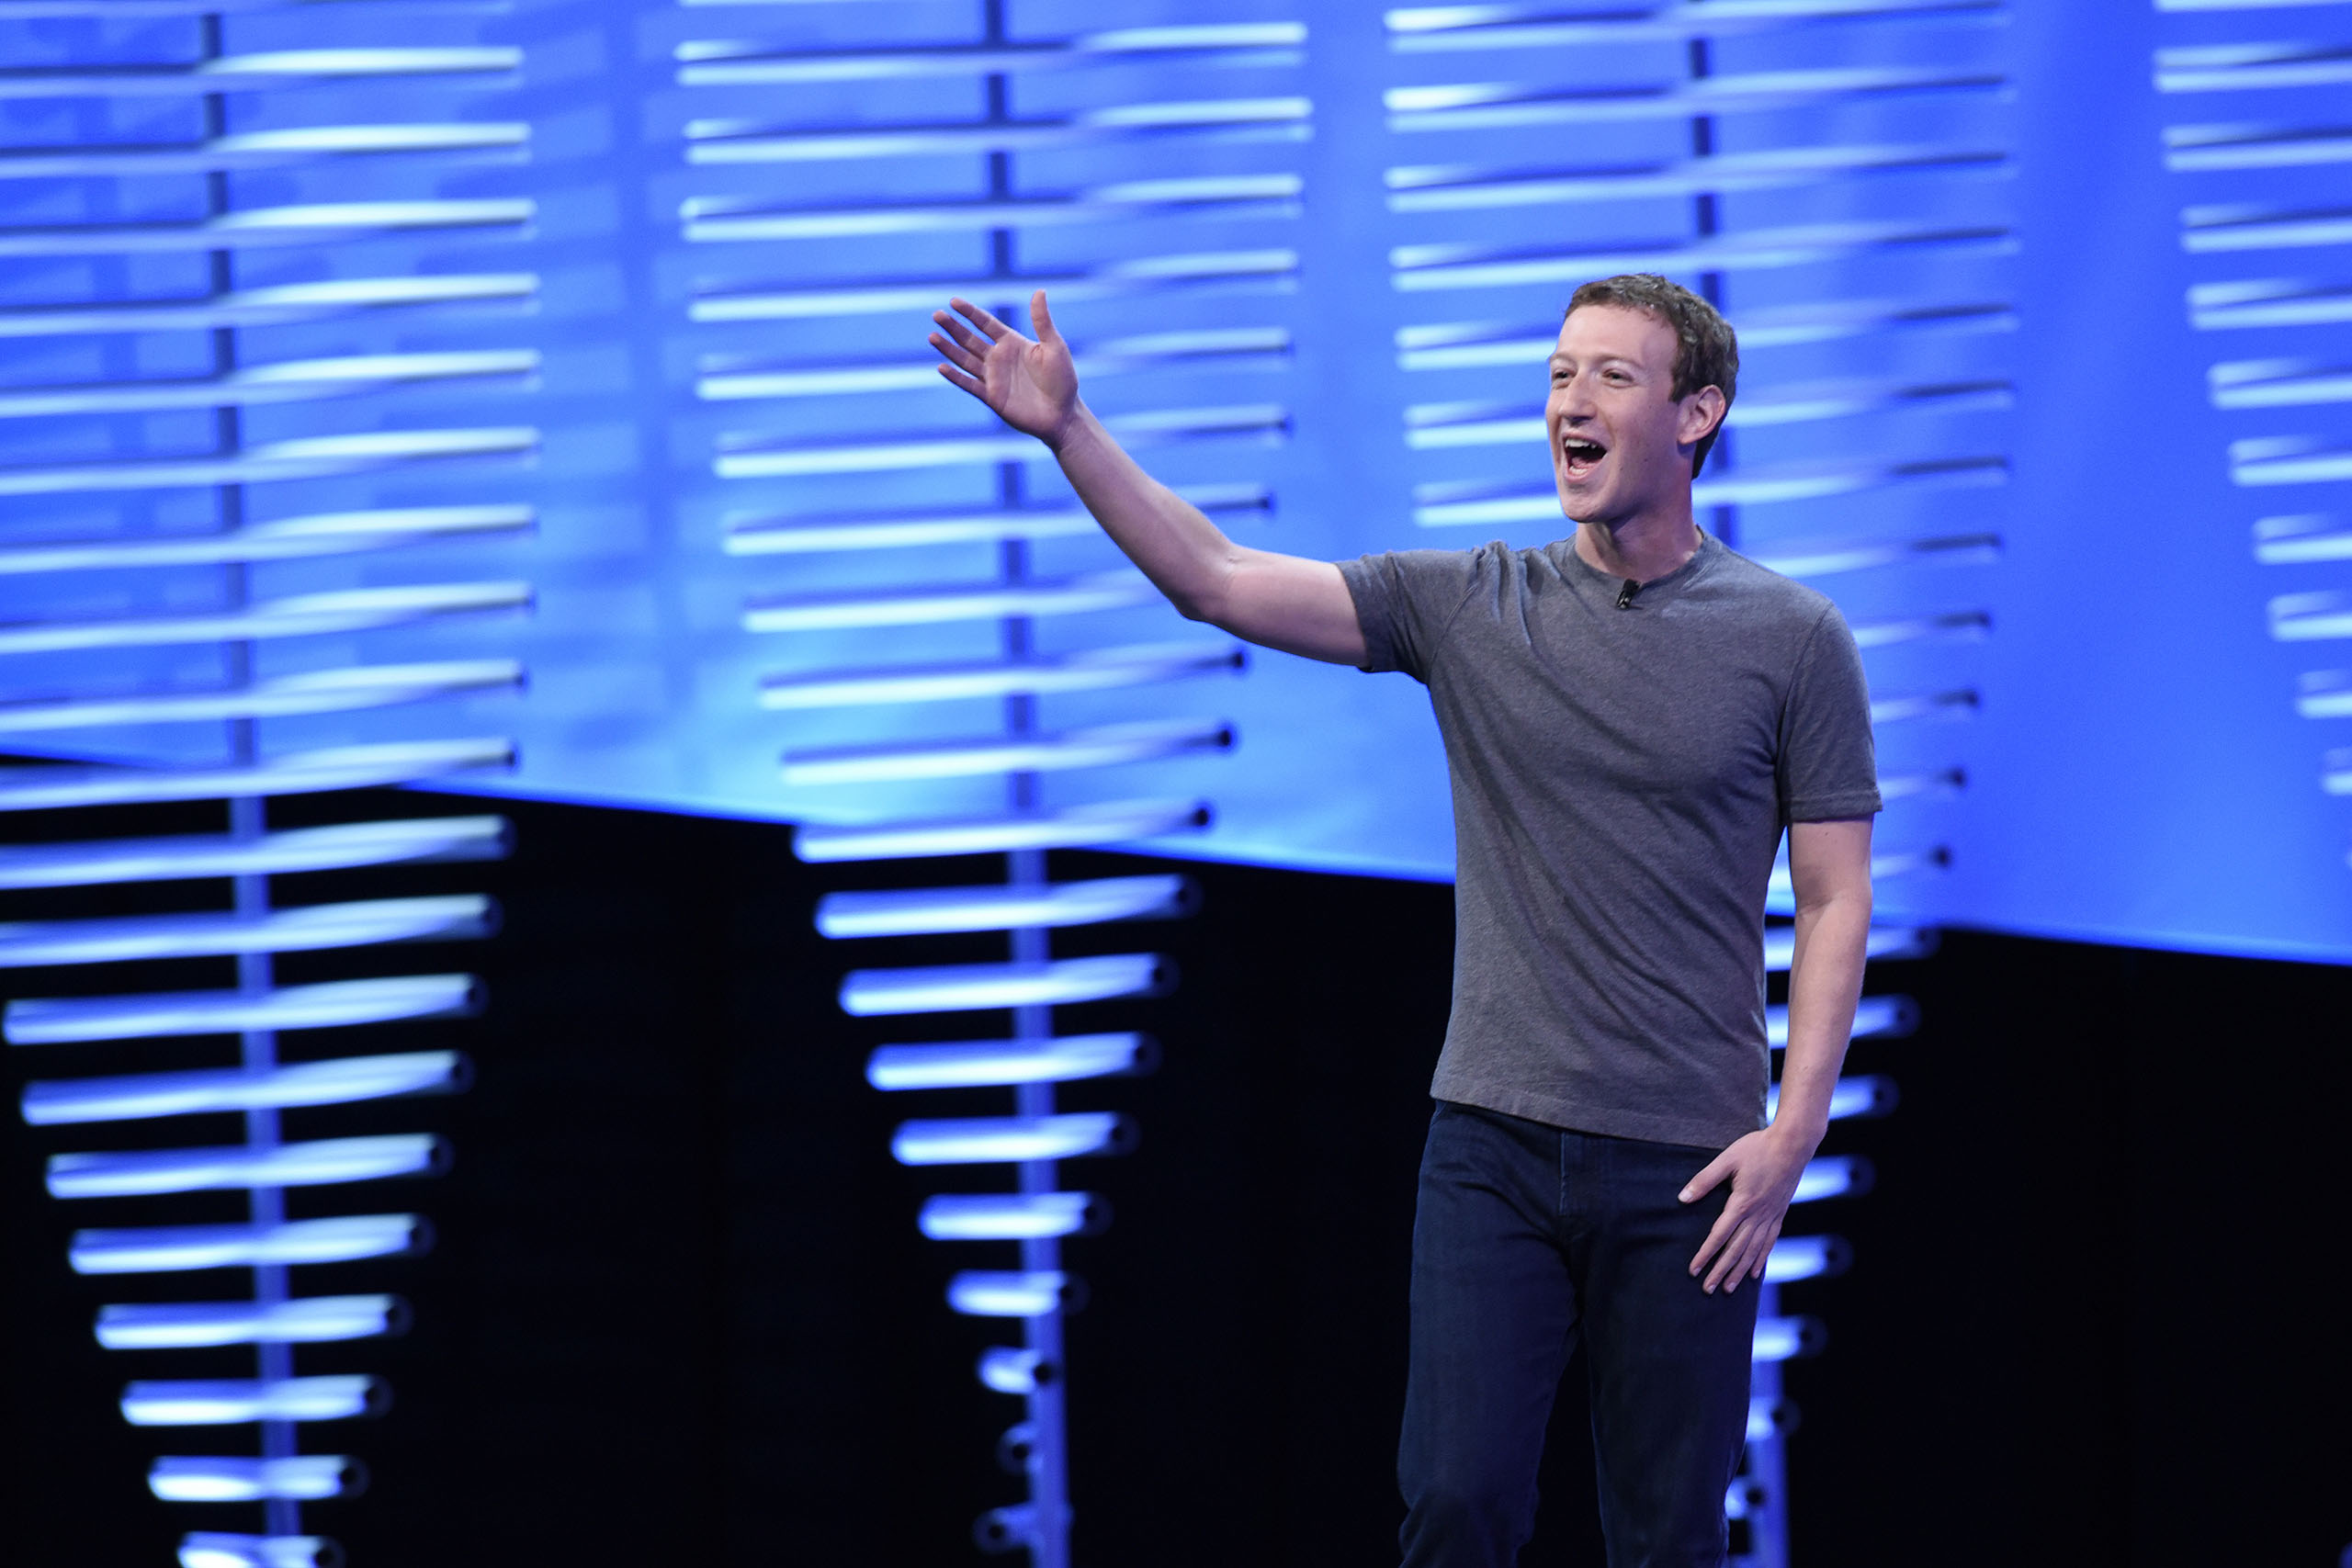 Mark Zuckerberg speaks during the Facebook F8 Developers Conference in San Francisco, Calif., April 12, 2016. (Michael Short—Bloomberg/Getty Images)